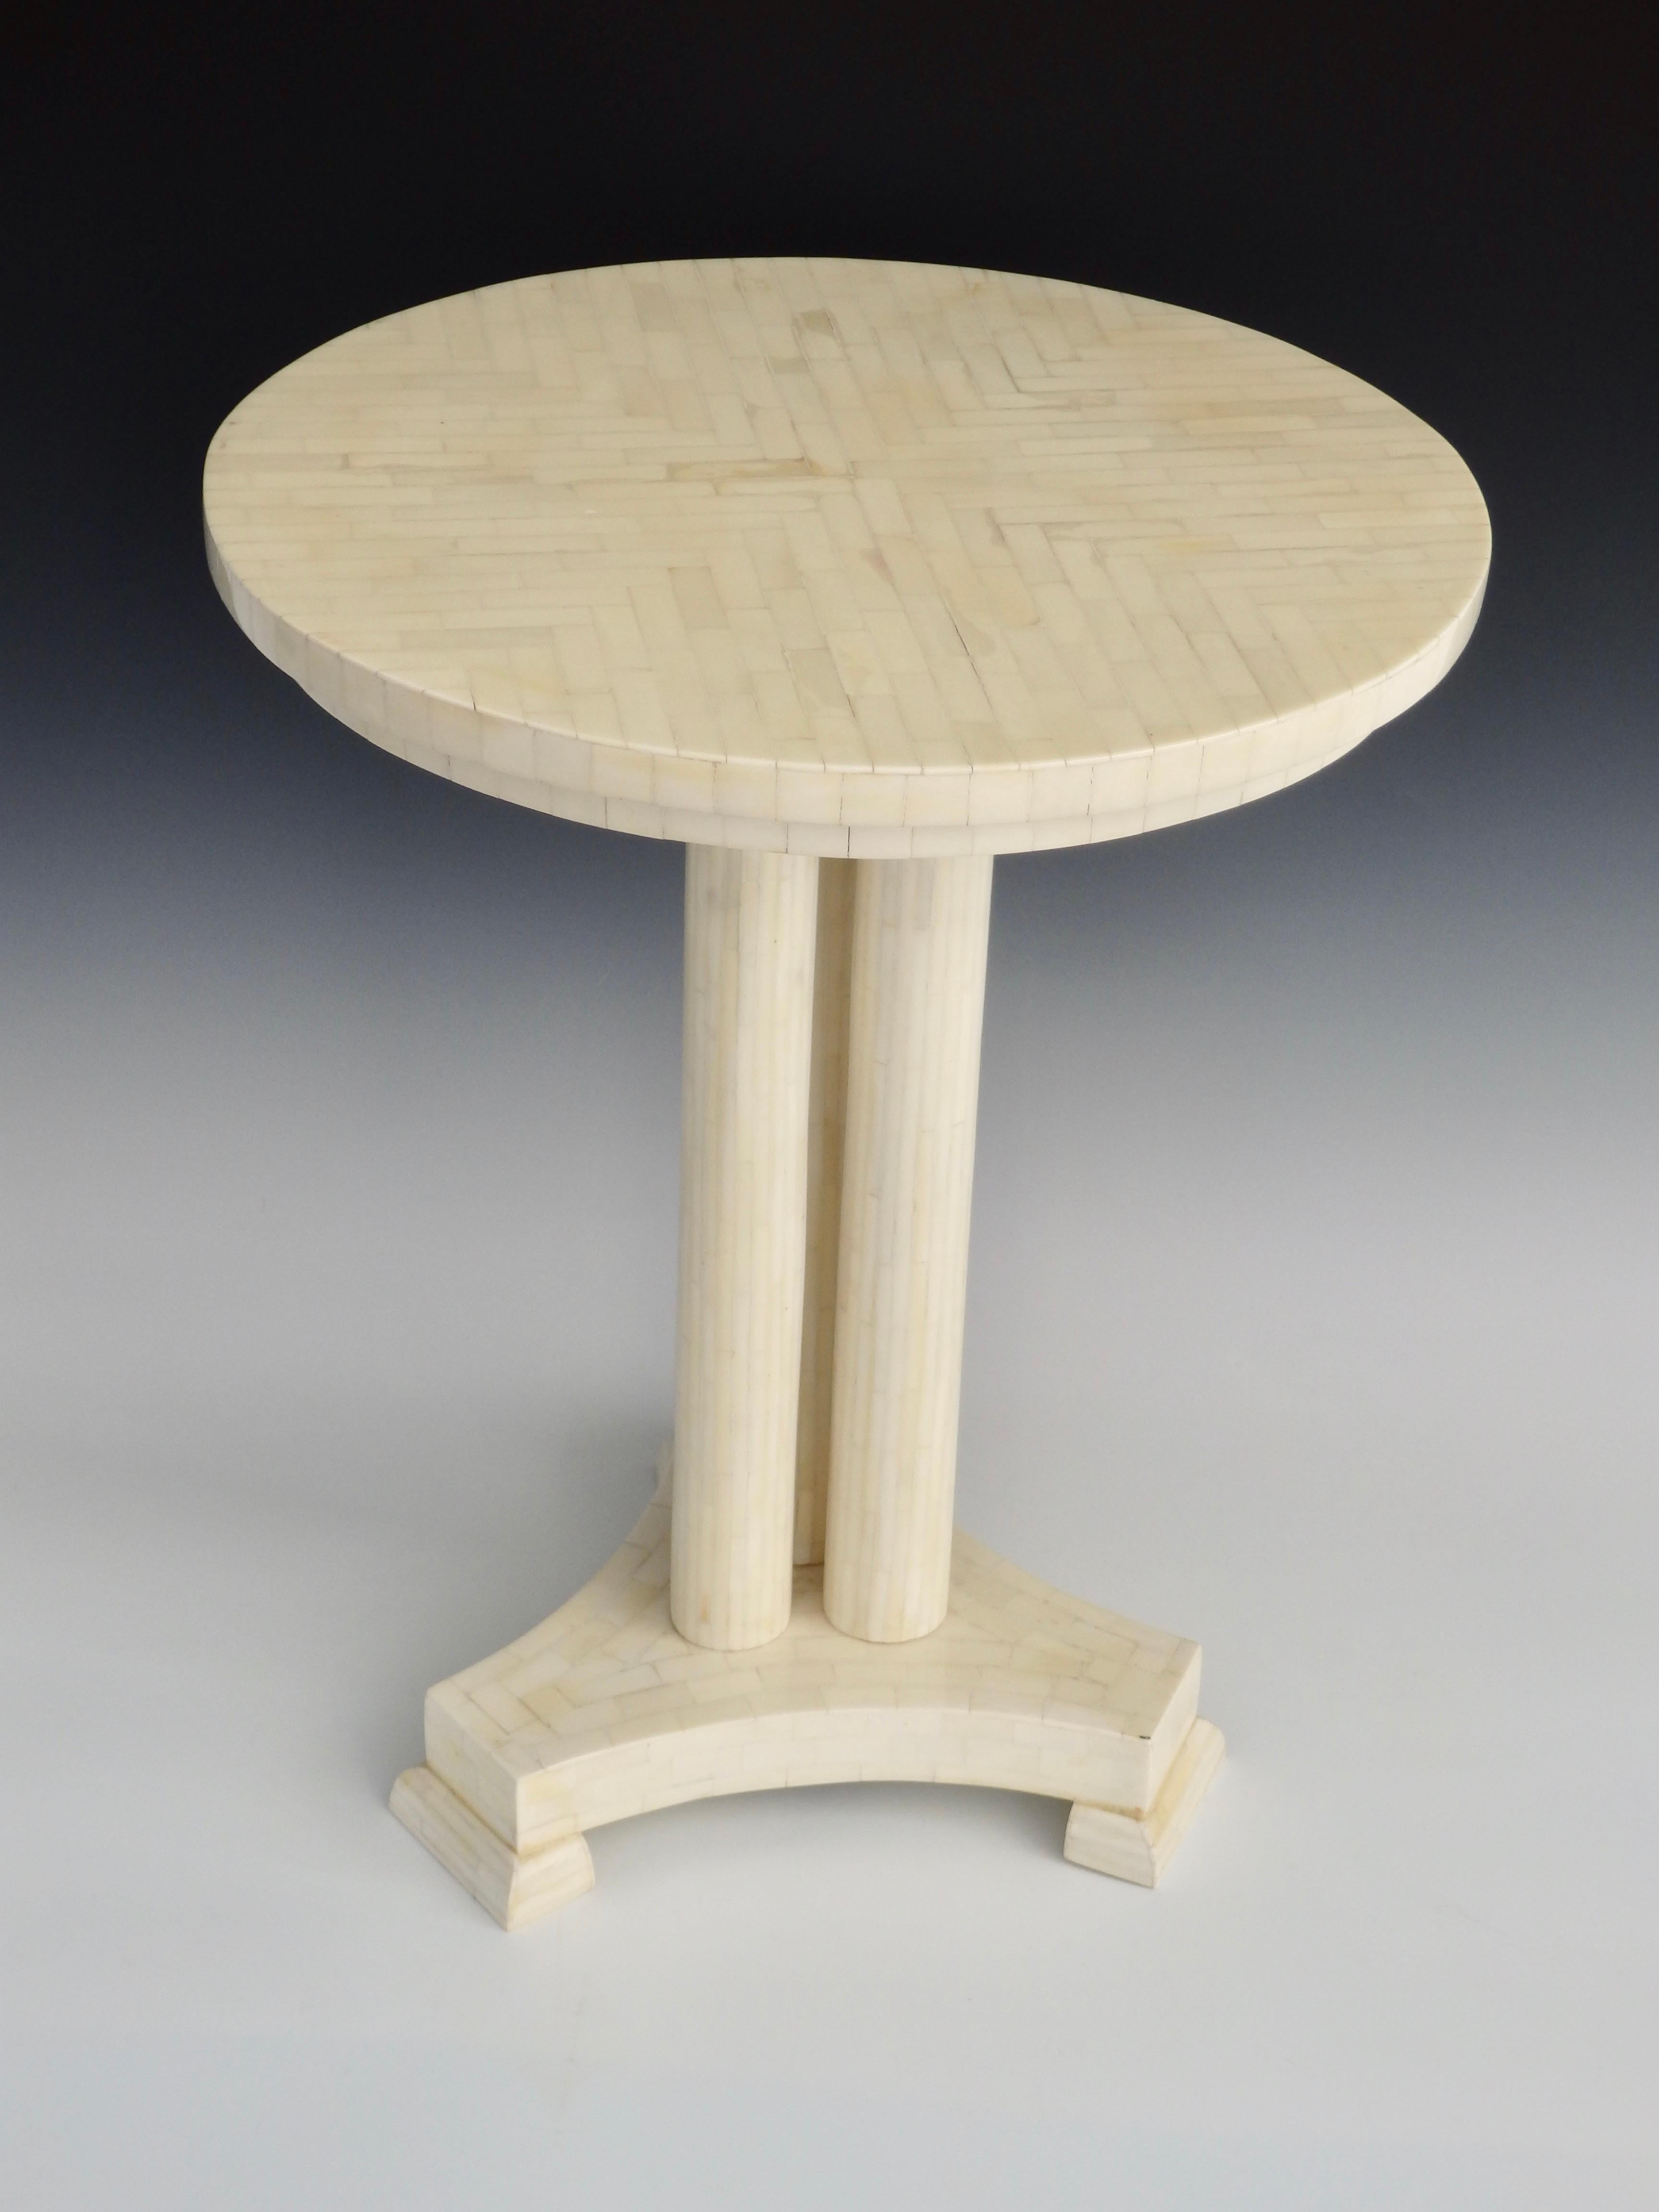 Colombian Tessellated Pedestal Table, Attributed to Maitland Smith